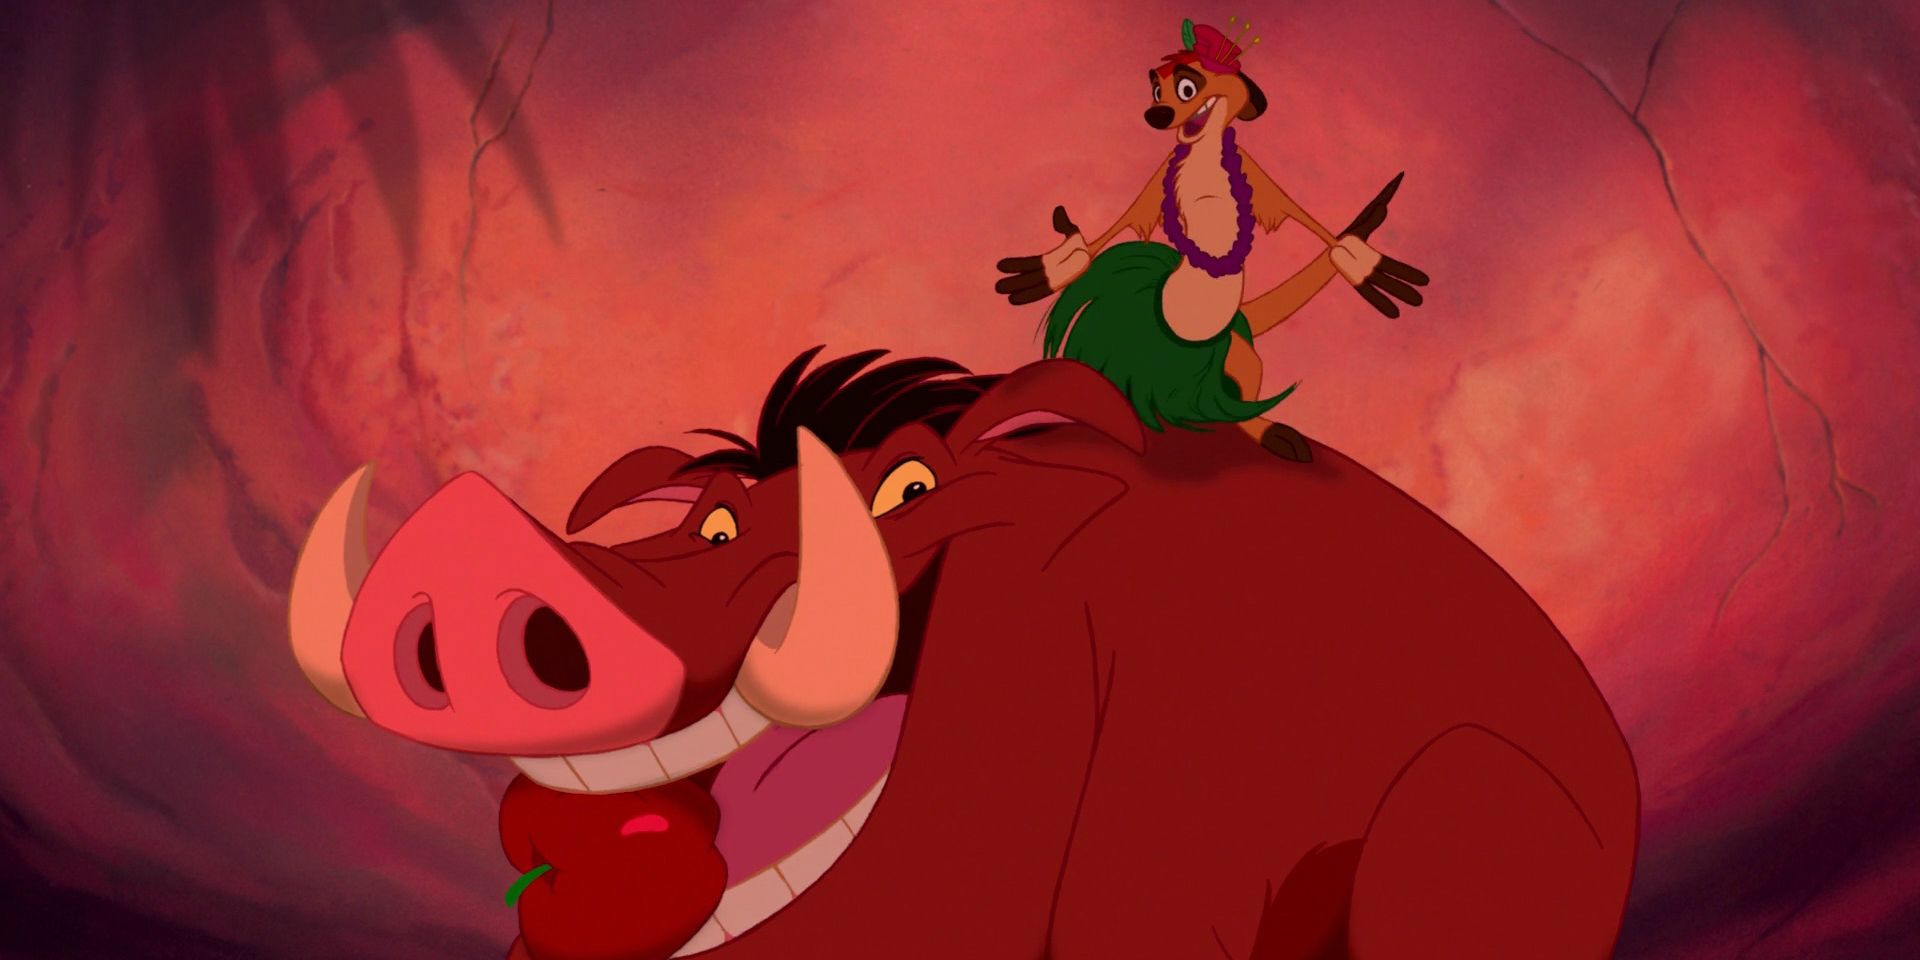 Disney 10 Strange Inspirations Behind Beloved Characters You Never Knew About